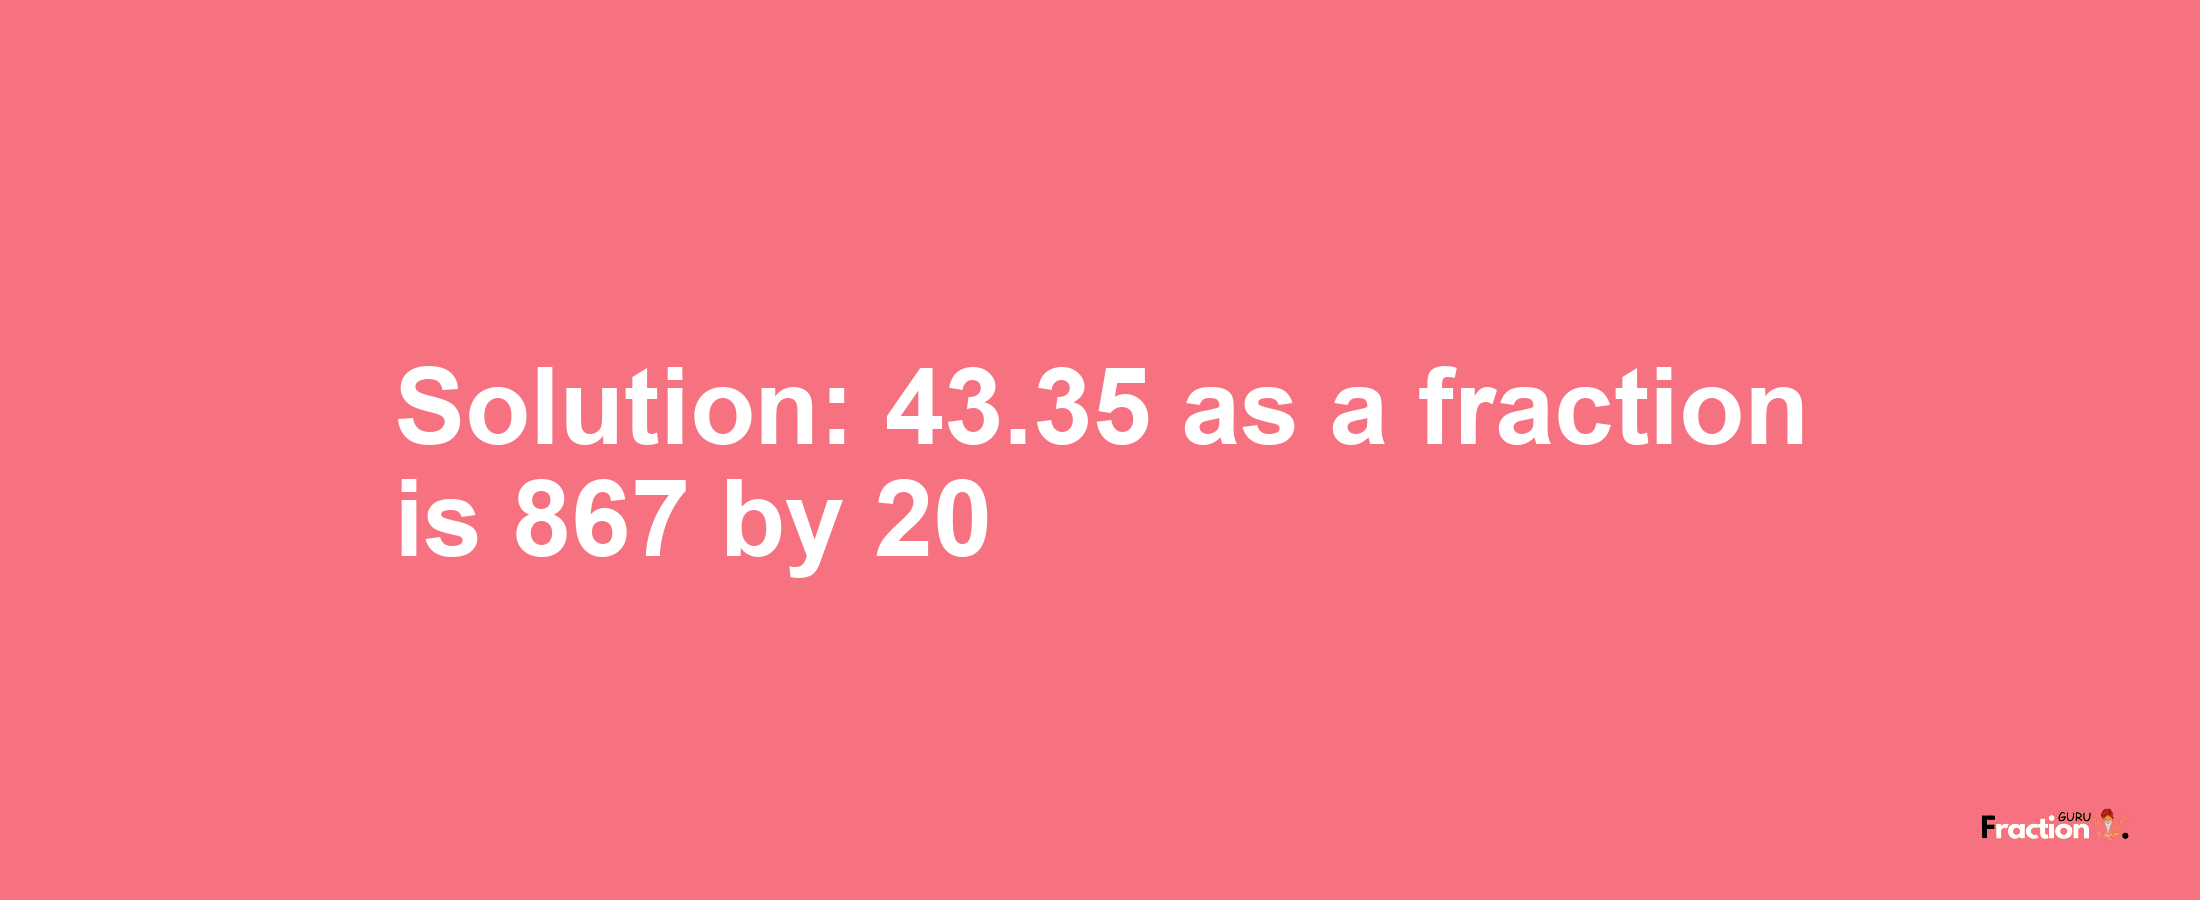 Solution:43.35 as a fraction is 867/20